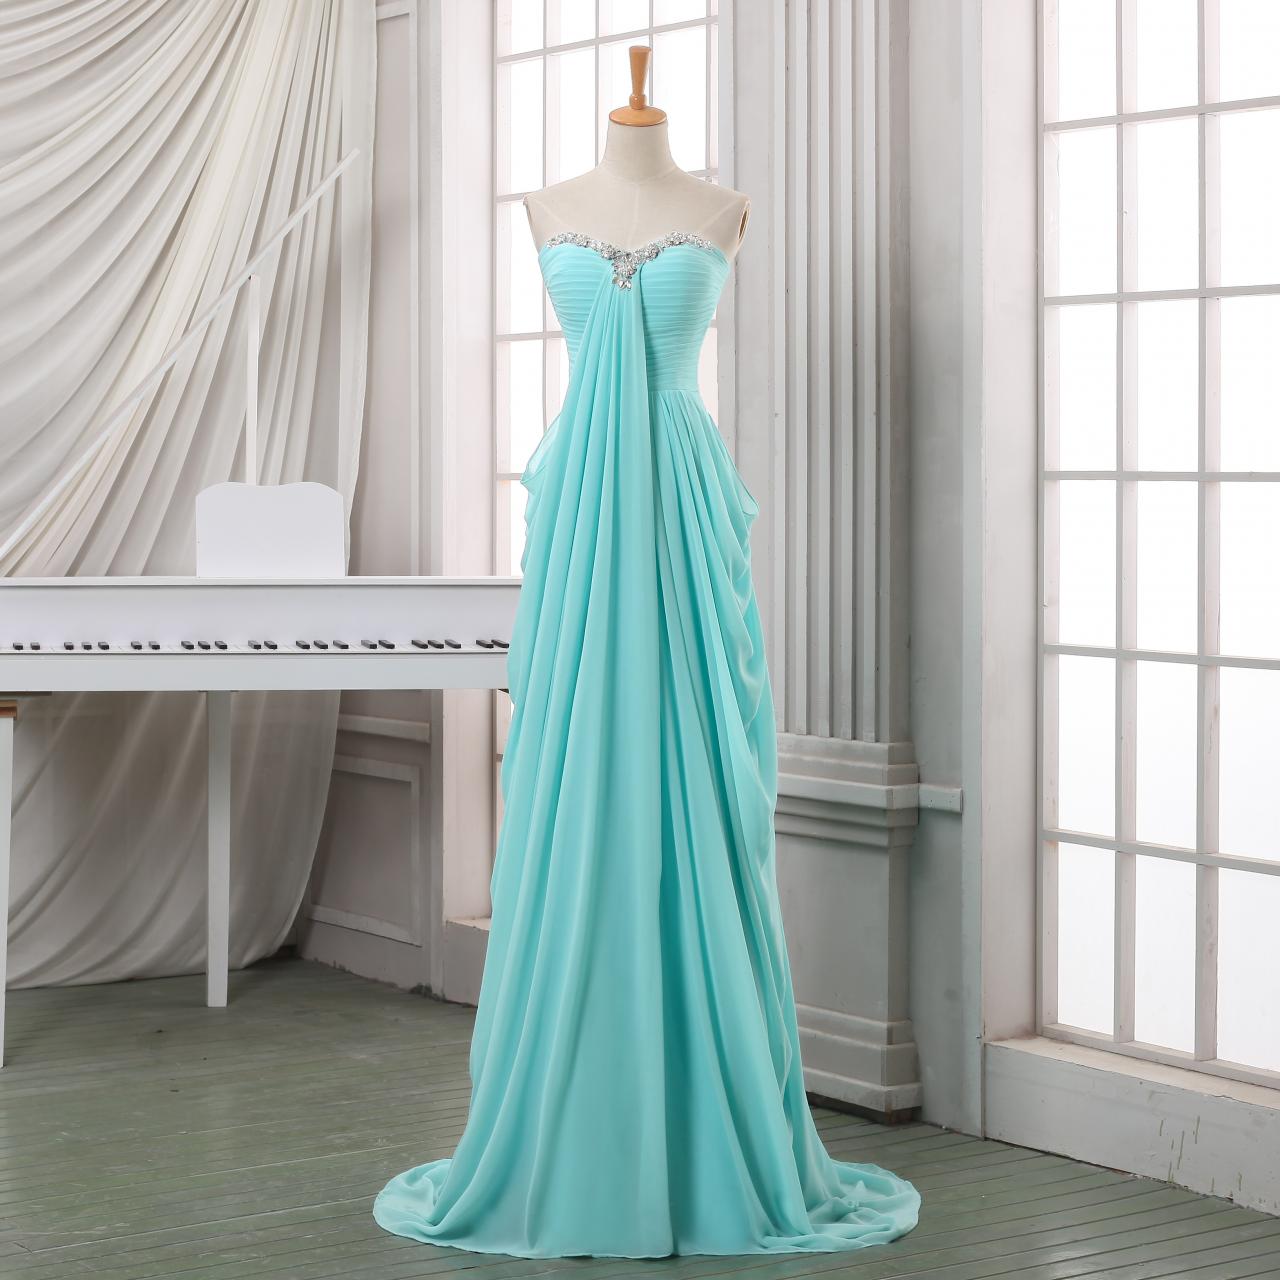 Prom Dresses,evening Dress,party Dresses,long Pleated Chiffon Prom Dress,a Line Sweeetheart Prom Dress,baby Blue Chiffon Long Prom Dresses,formal